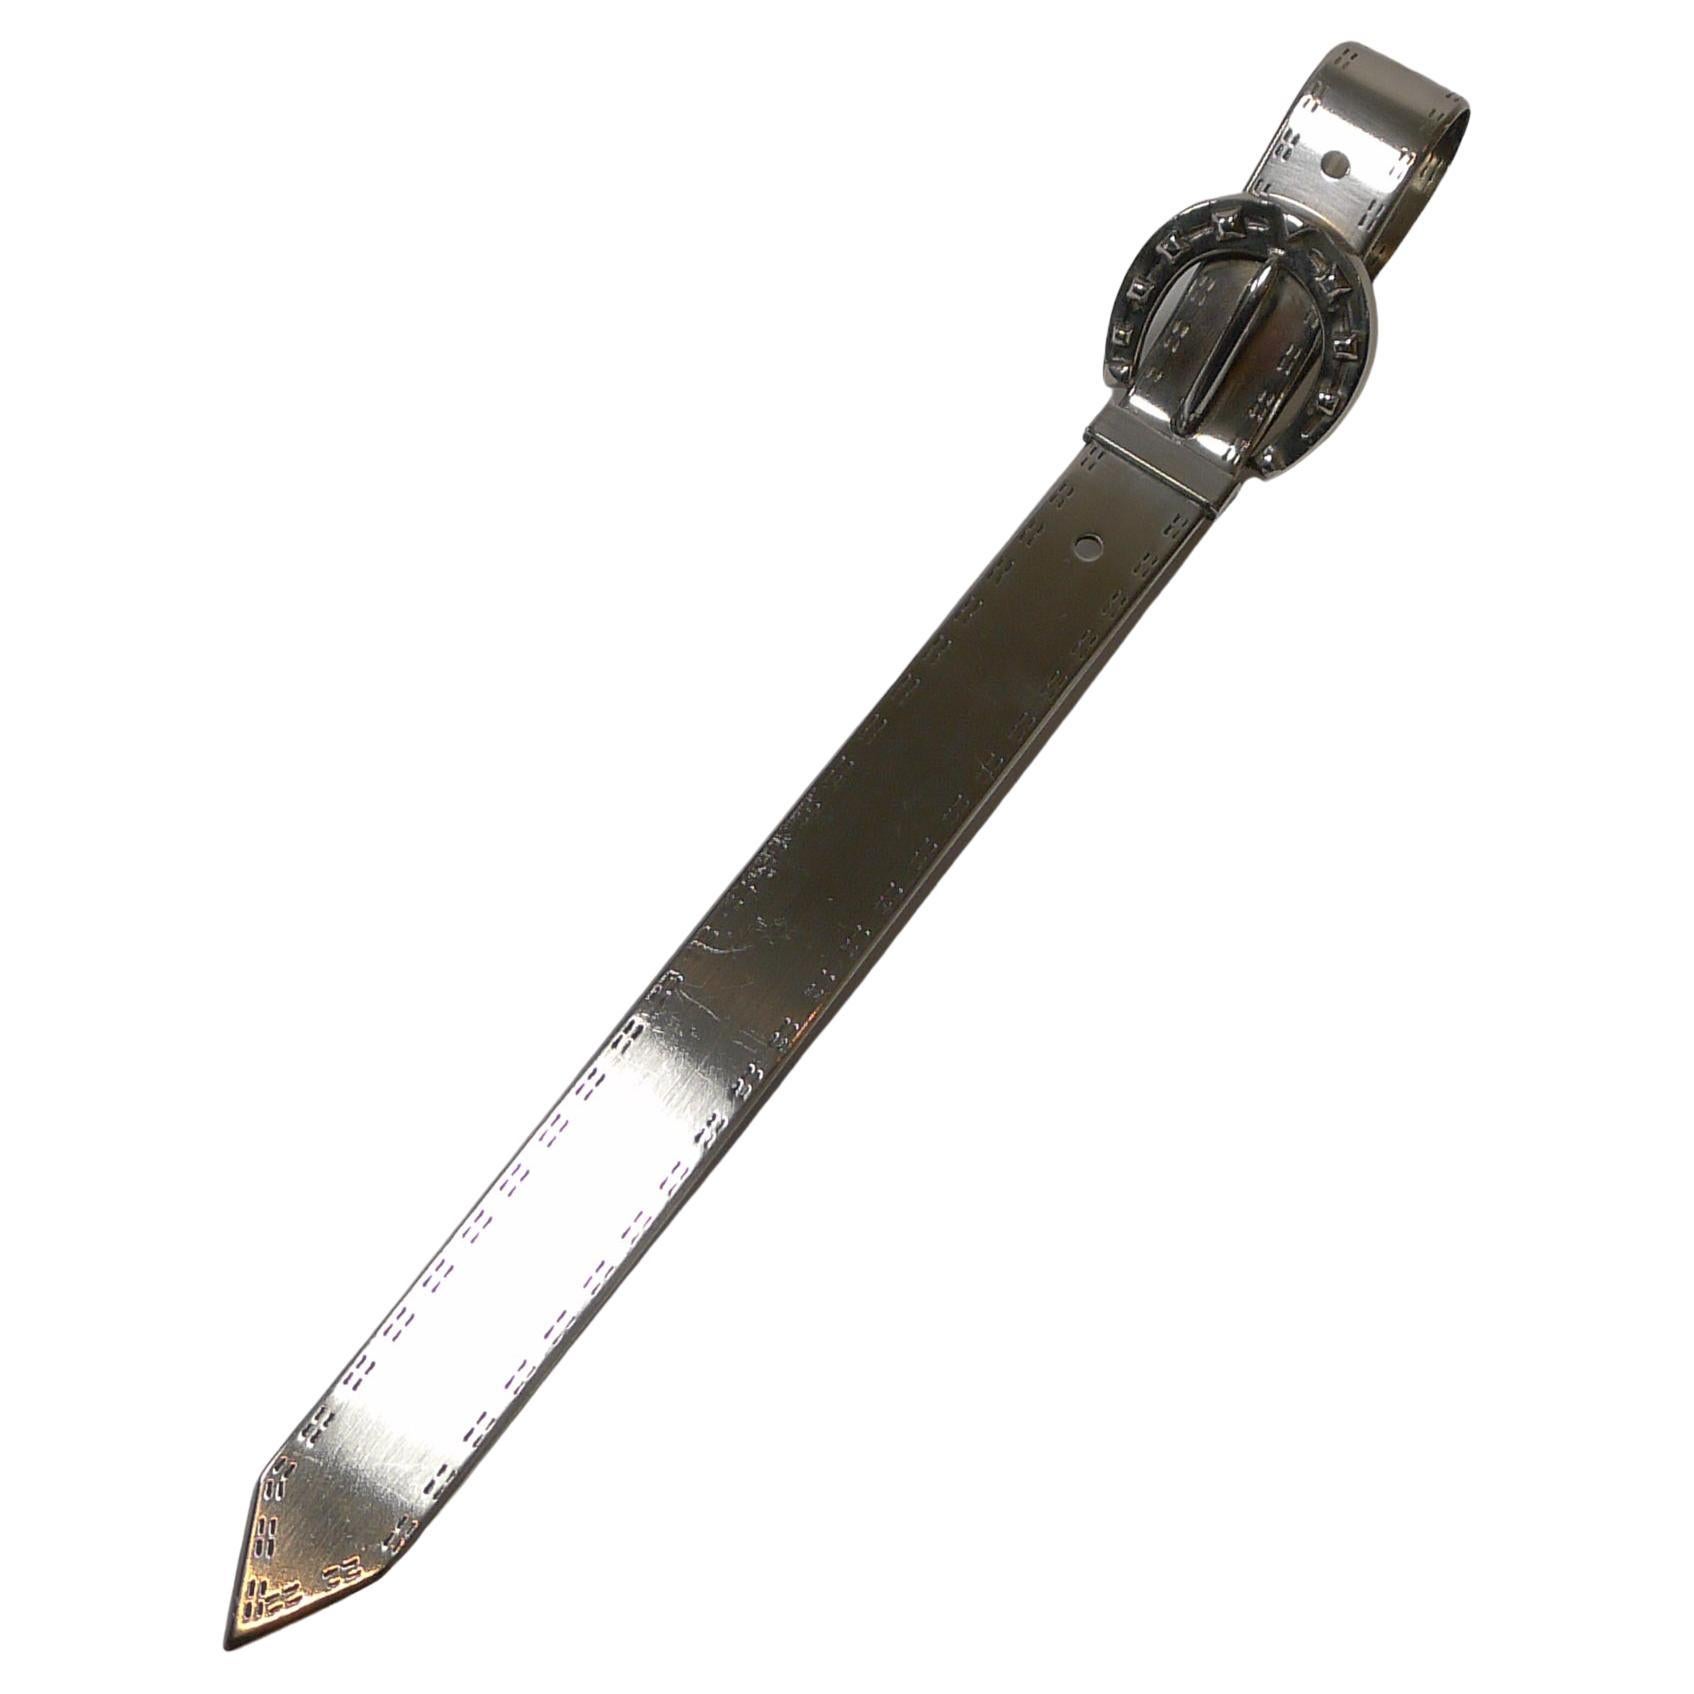 An unusual and highly sought-after vintage silver plated letter opener by the world renowned, Christian Dior.

The letter opener is fashioned in the form of a belt with engraved 